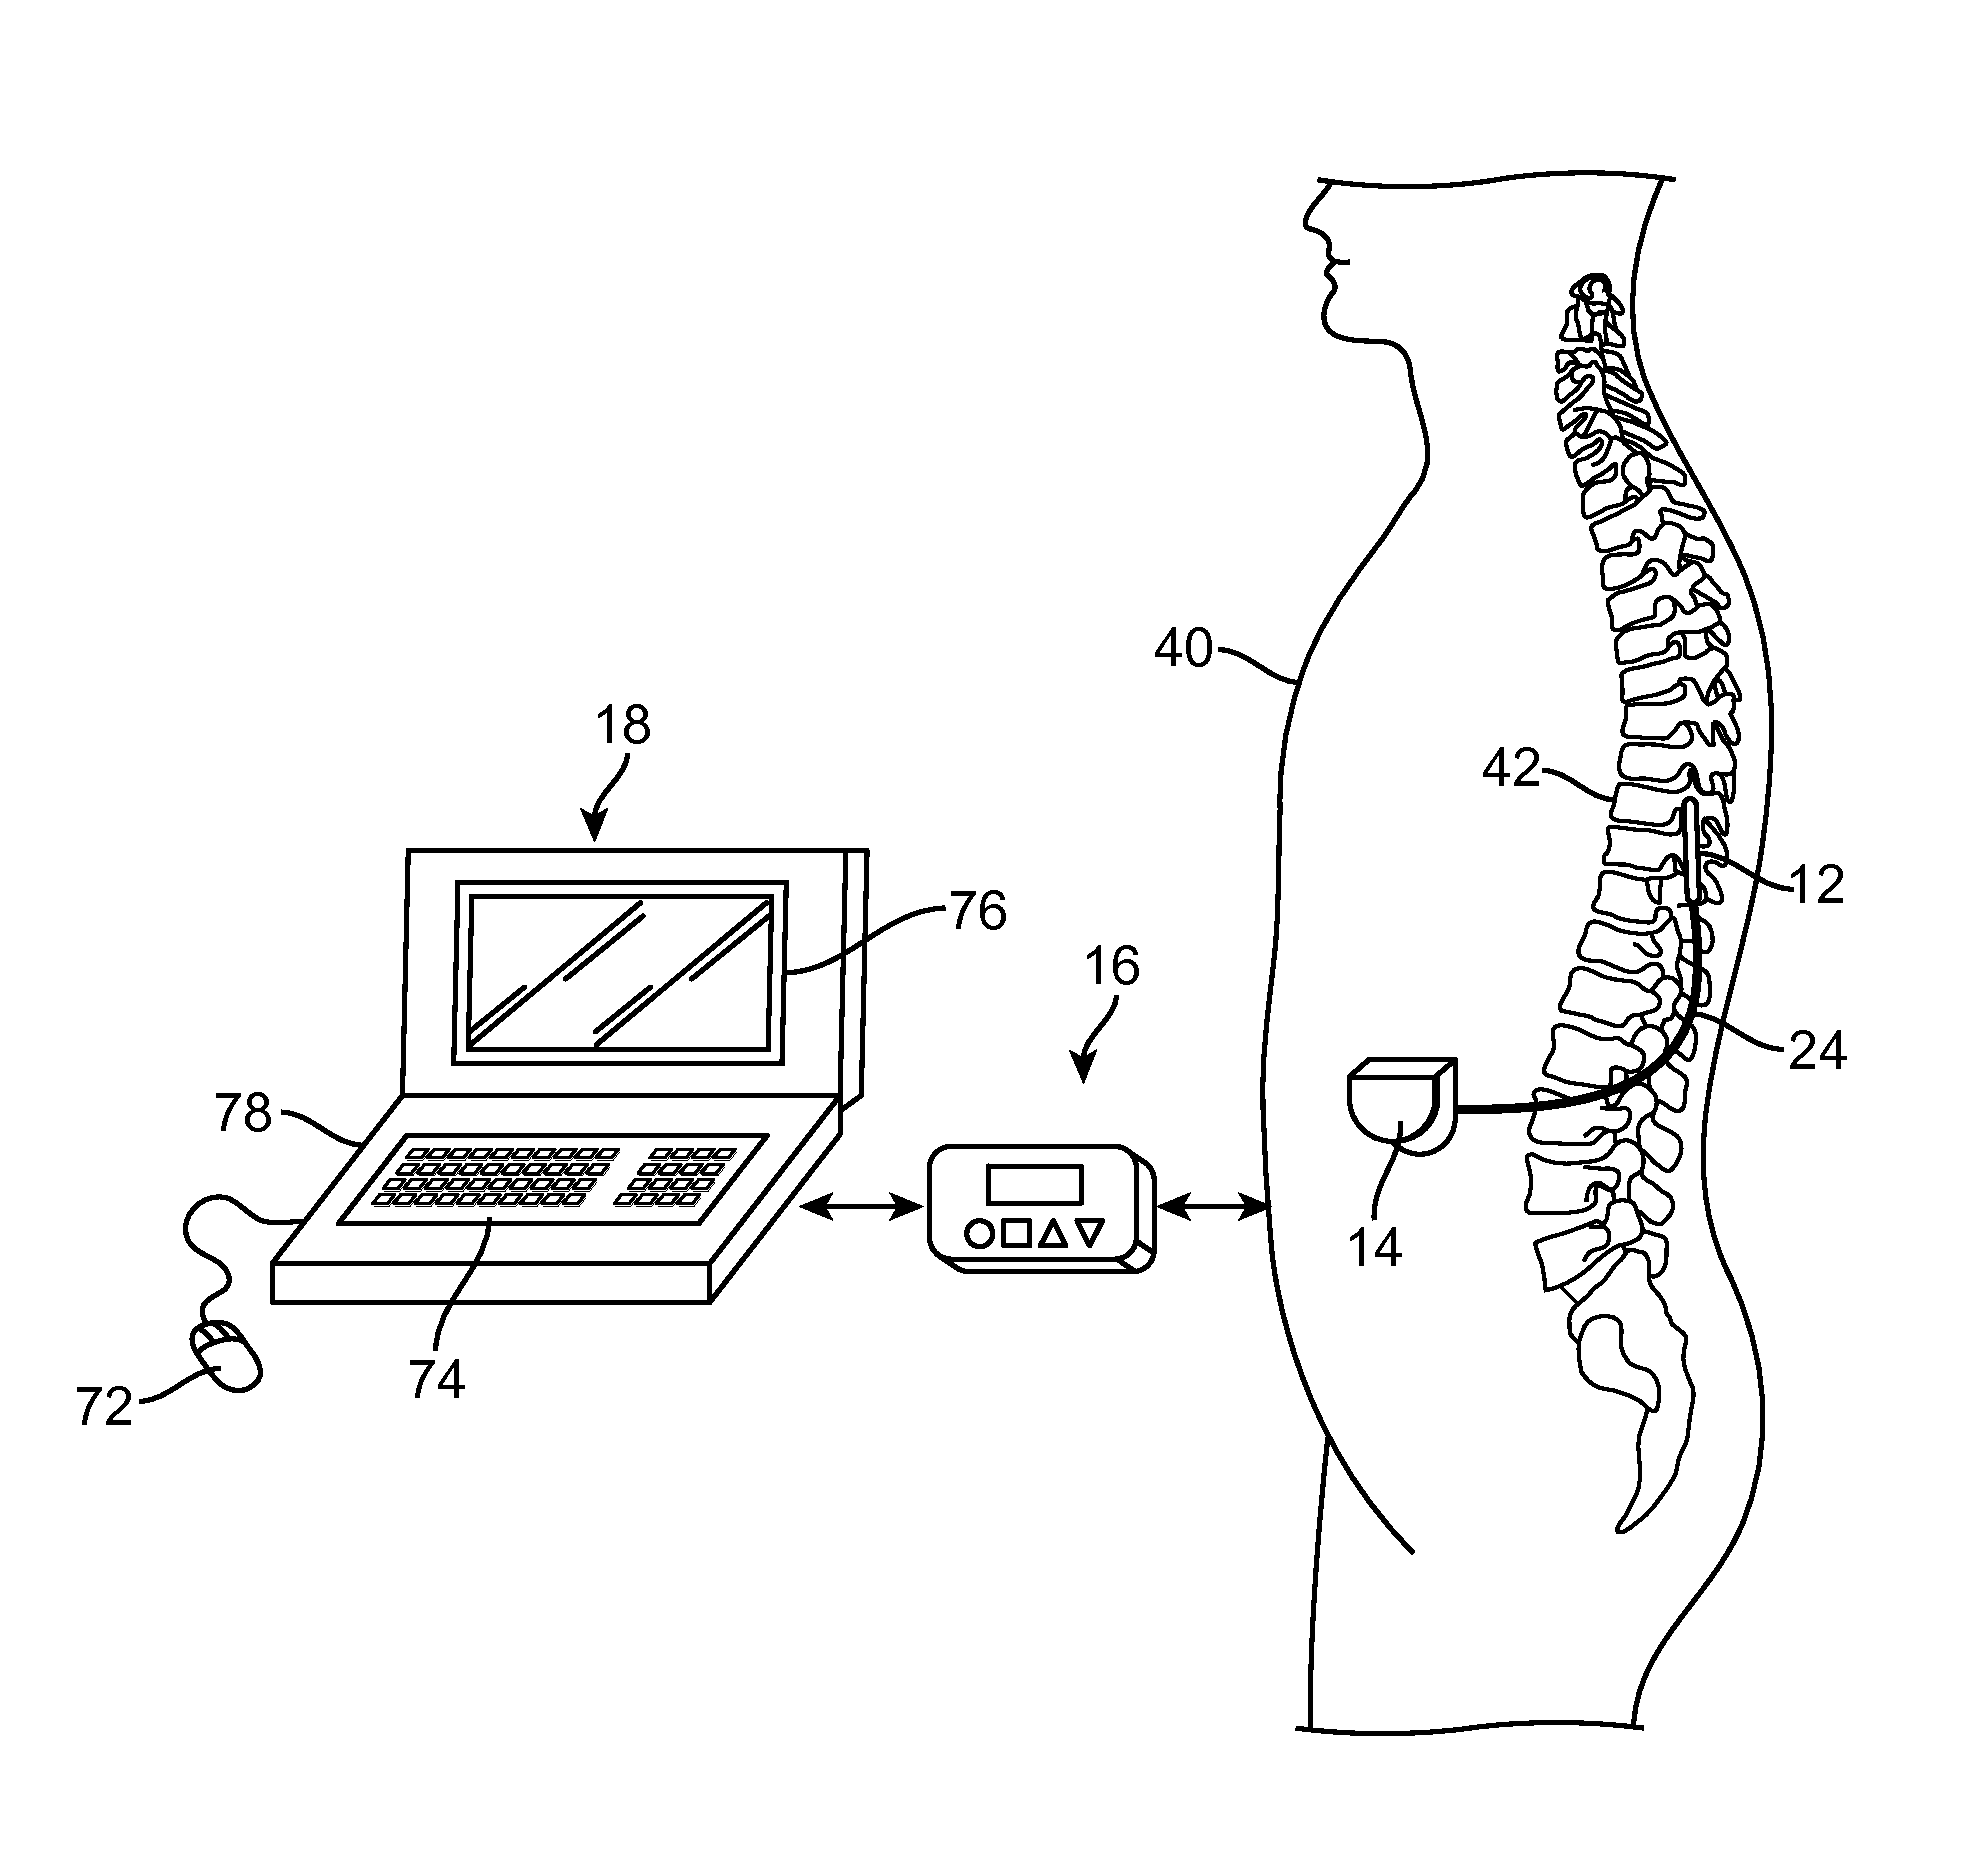 Neurostimulation system and method with graphically manipulatable stimulation target